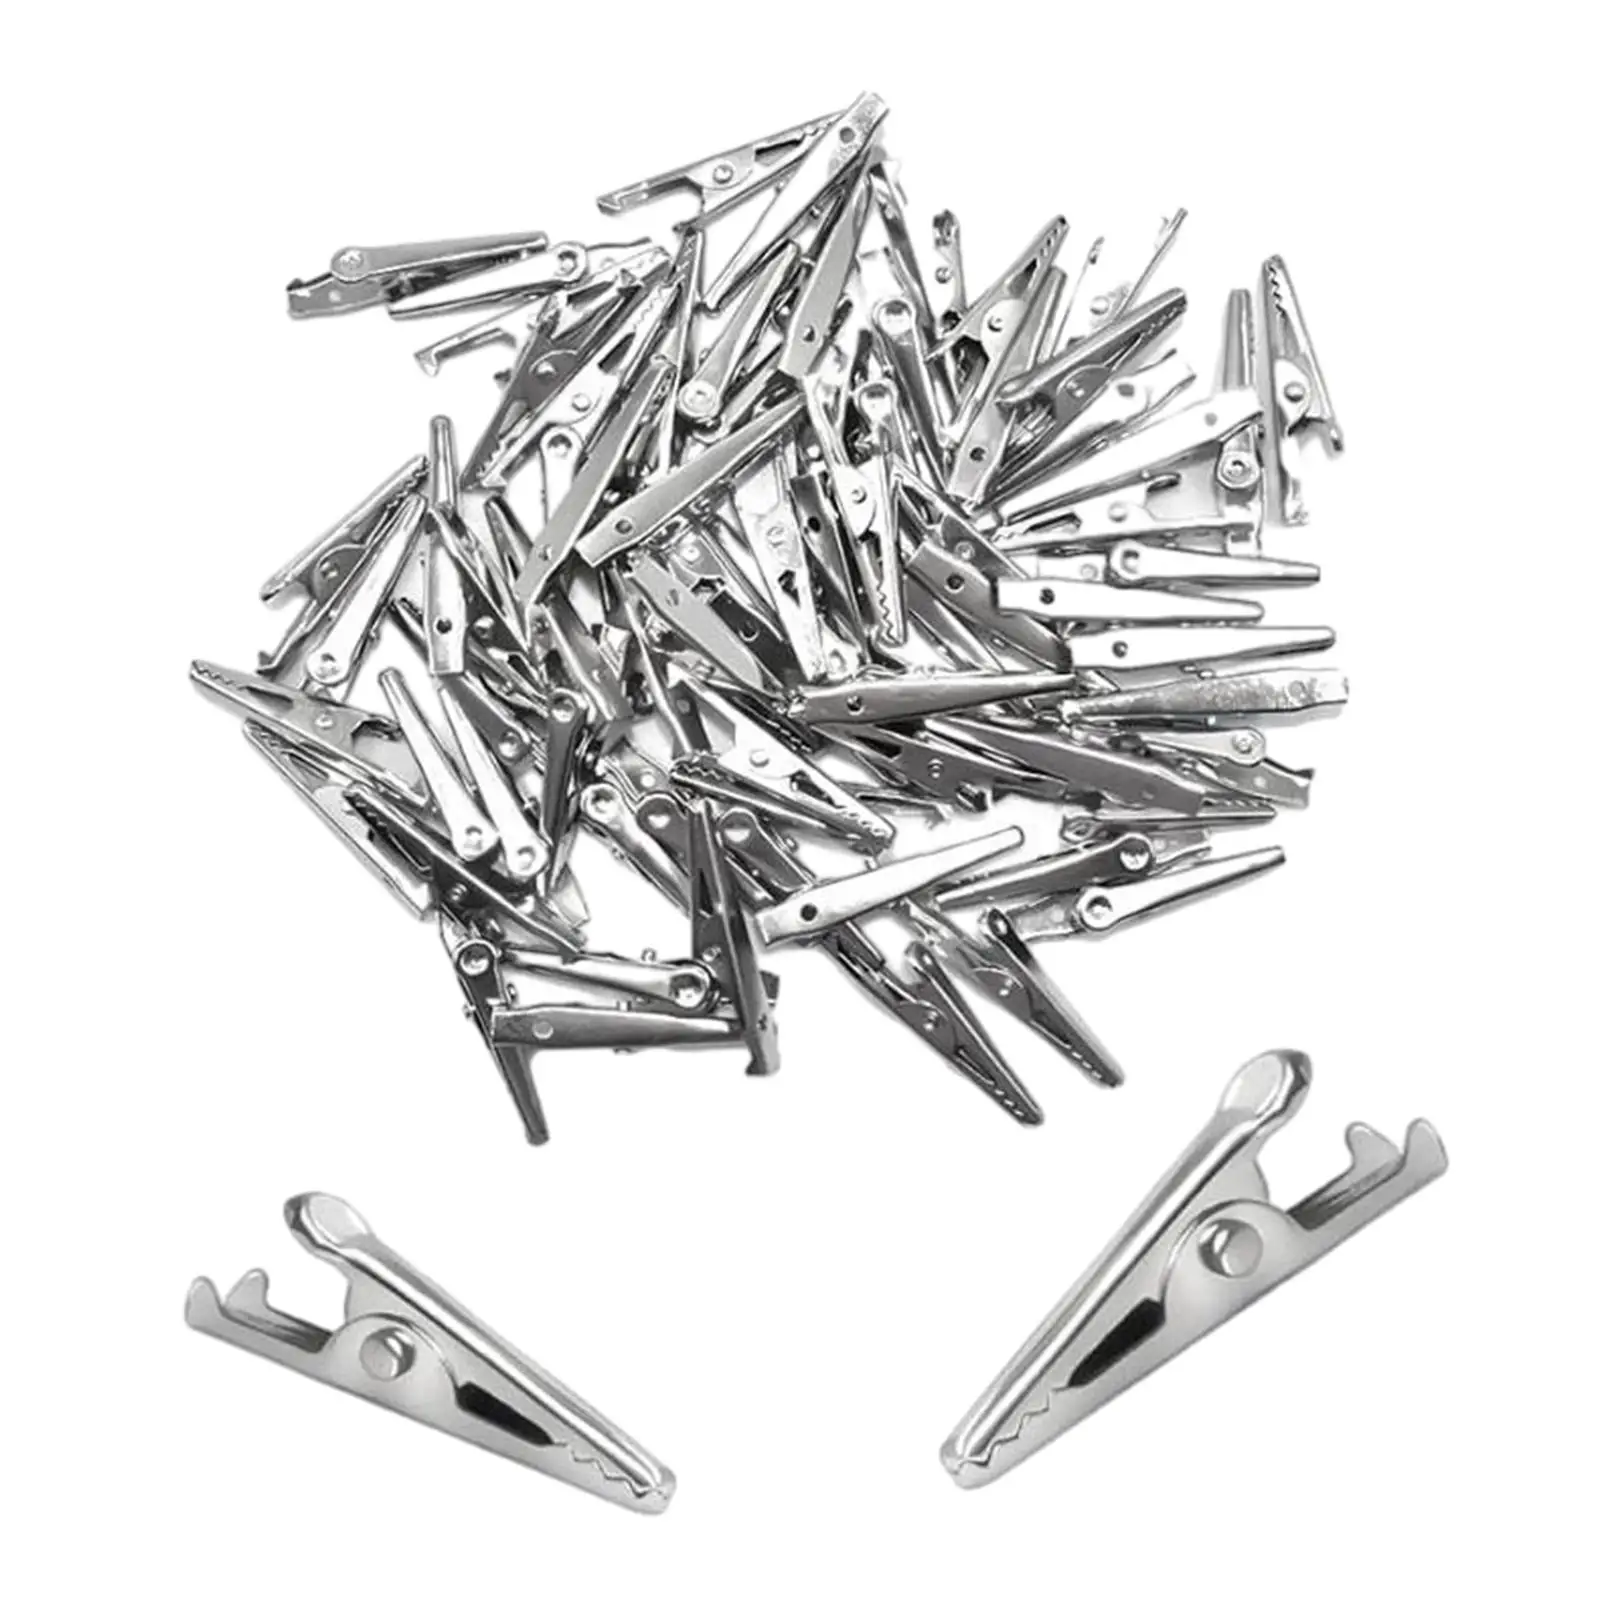 100 Pieces Metal Alligator Clips Cable Lead Clip Test Clip 35mm Crocodile Clamps Spring Clamps for Laboratory Testing Electrical